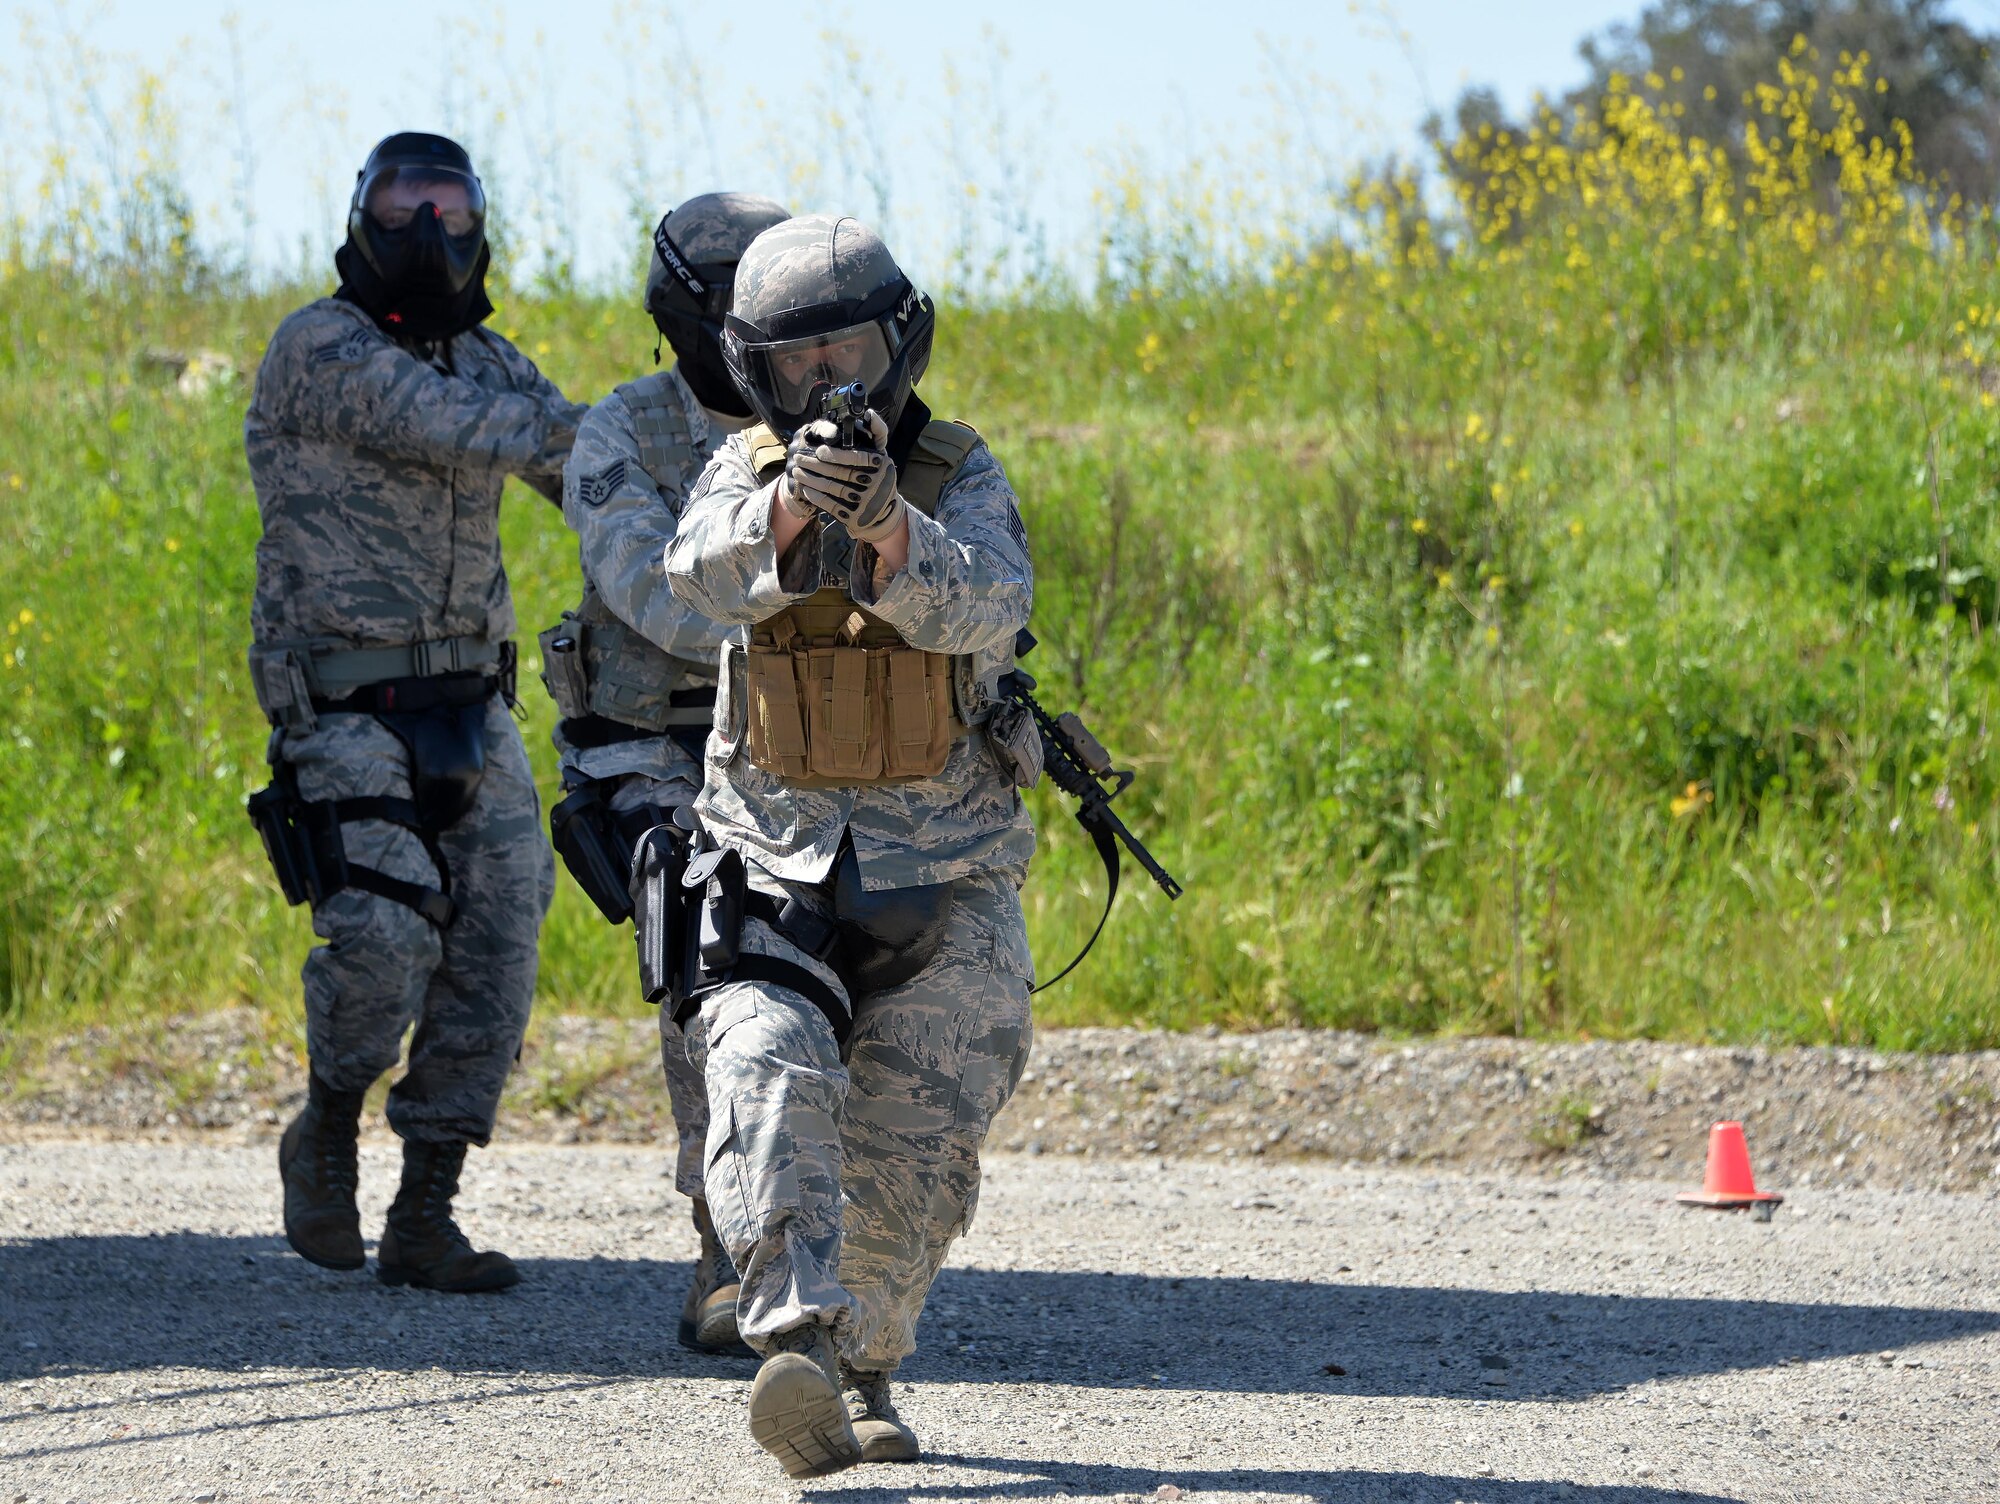 Tech. Sgt. Brooke Williams, 60th Security Forces Squadron raven program manager, runs as the point person on a security team responding to a simulated active shooter event April 13, 2016, at Travis Air Force Base, California. As a Phoenix Raven, Williams provides close-in security for Air Mobility Command aircraft transiting airfields where security is unknown or additional security is needed to counter local threats. (U.S. Air Force photo by Staff Sgt. Charles Rivezzo) 